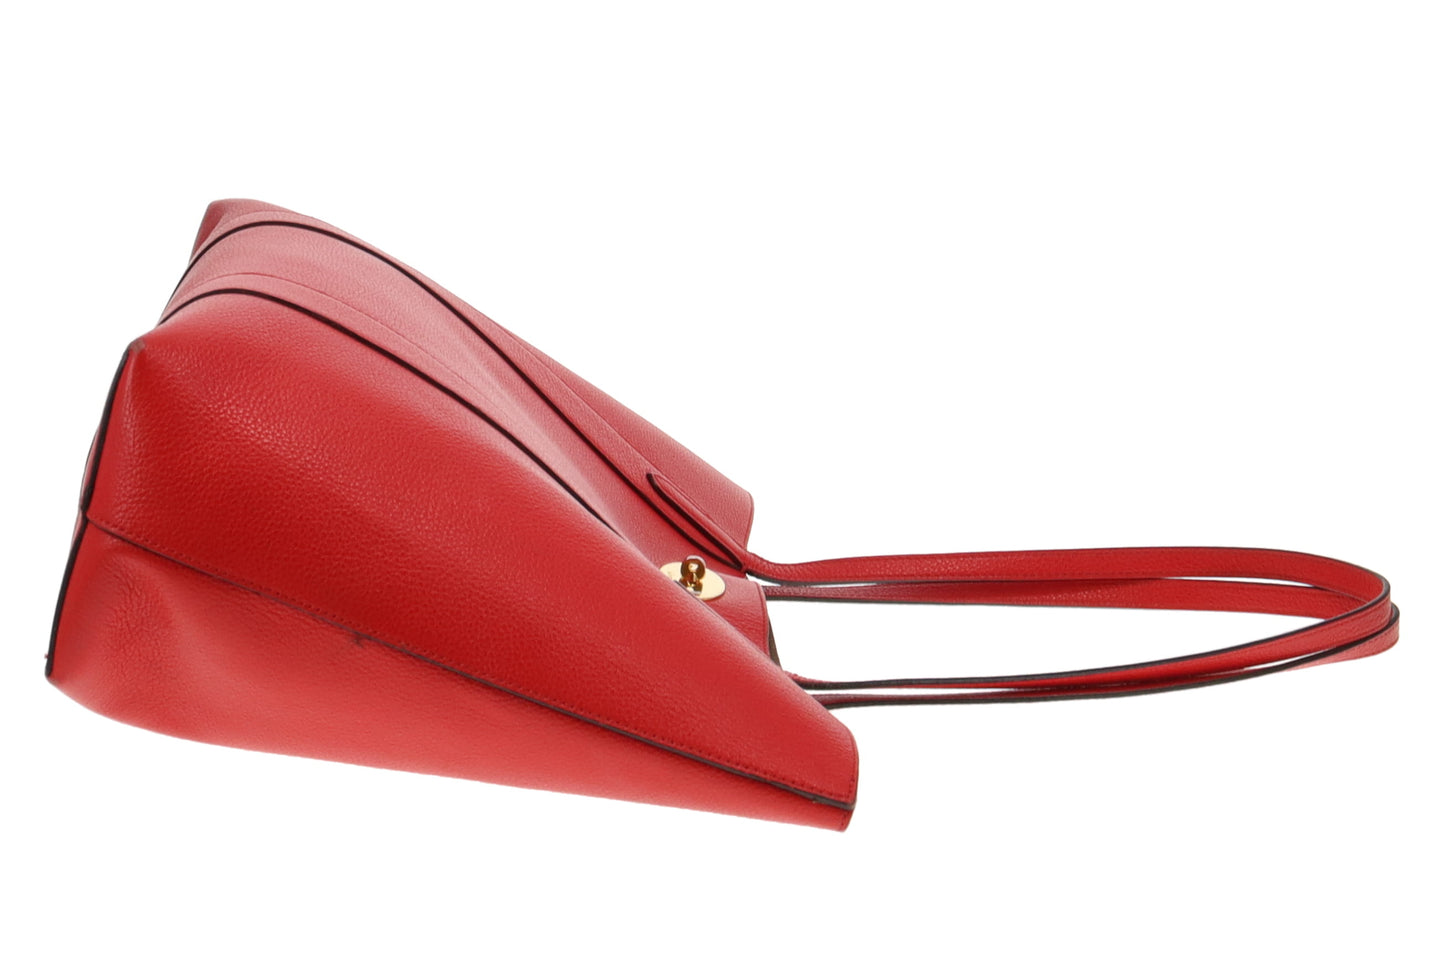 Mulberry Red Leather Bayswater Tote Bag